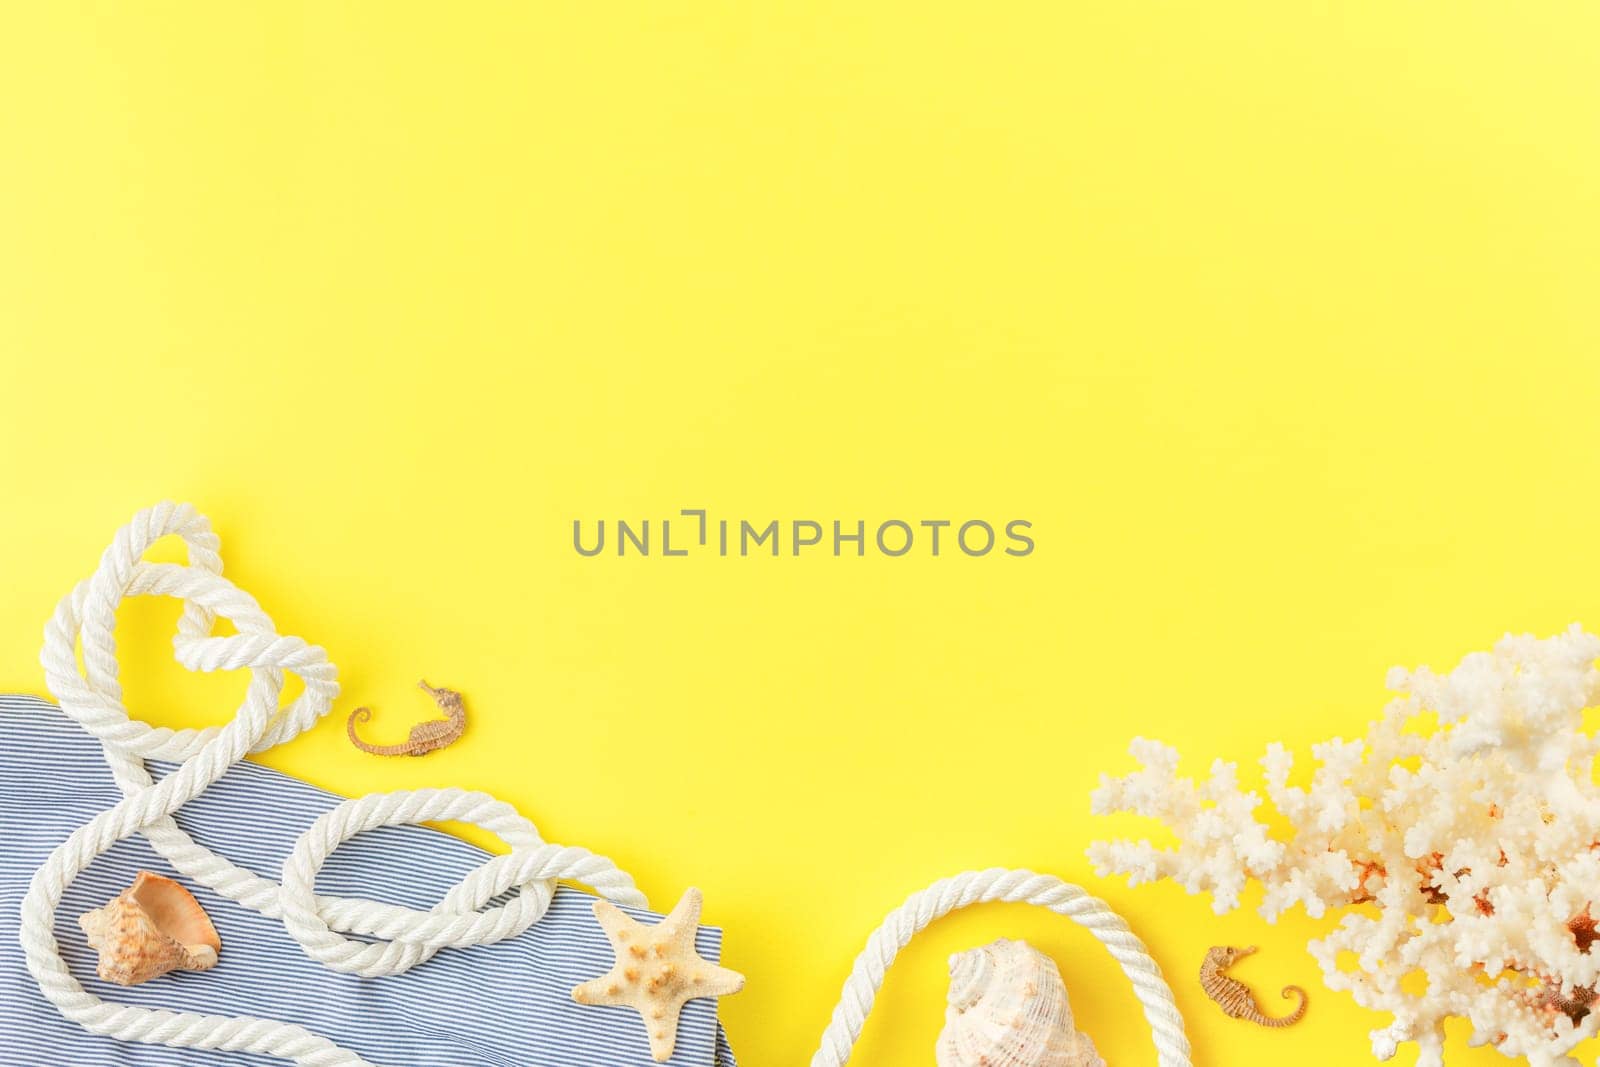 Nautical rope and striped tunic on yellow background with copy space. Flat lay. Summer vacation concept. Starfish and coral. Top view.